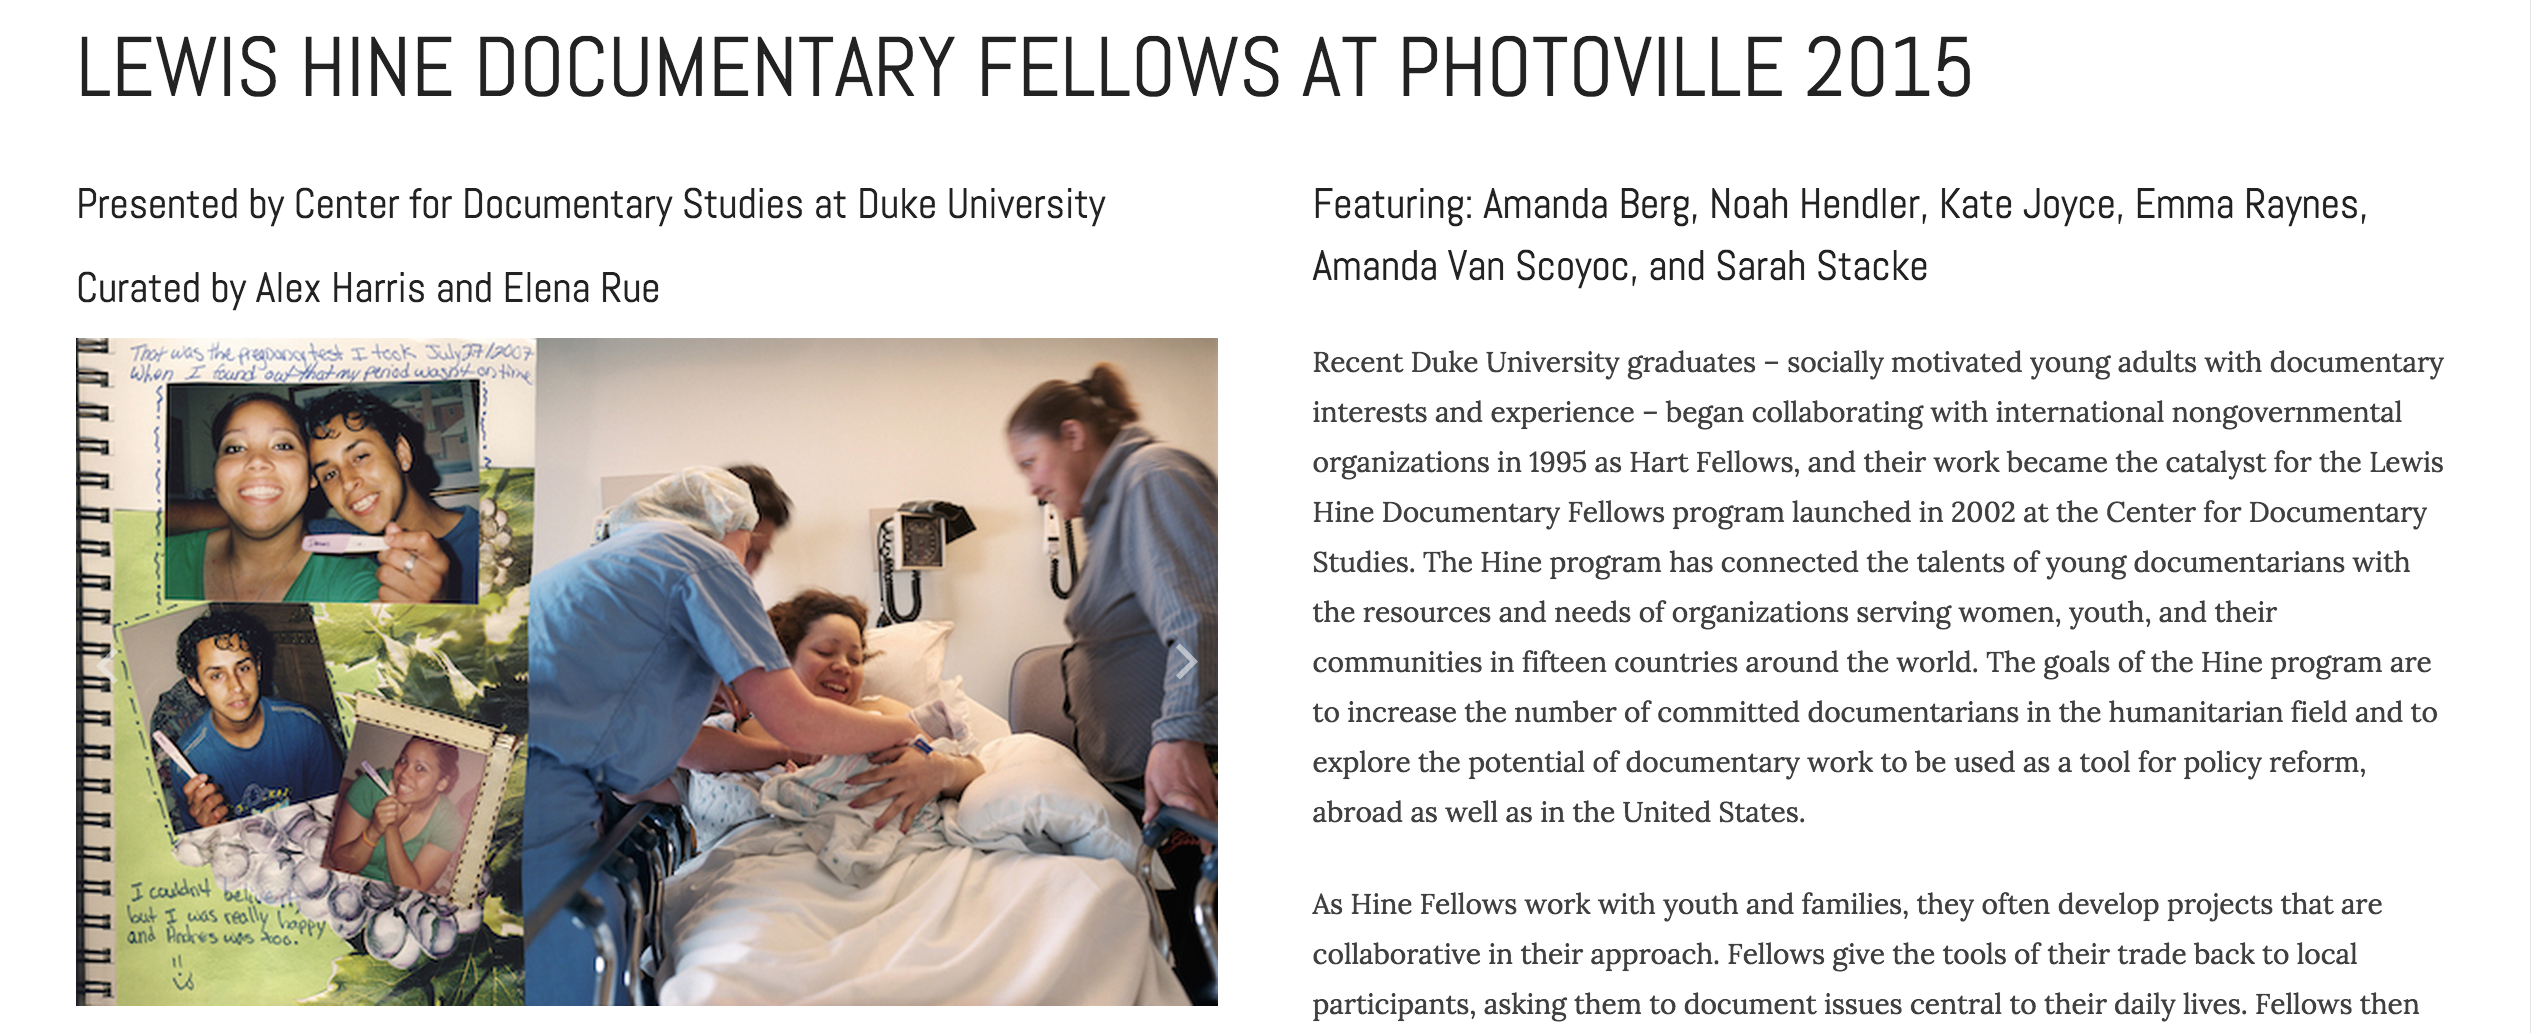 Hine Fellows Exhibit at Photoville 2015